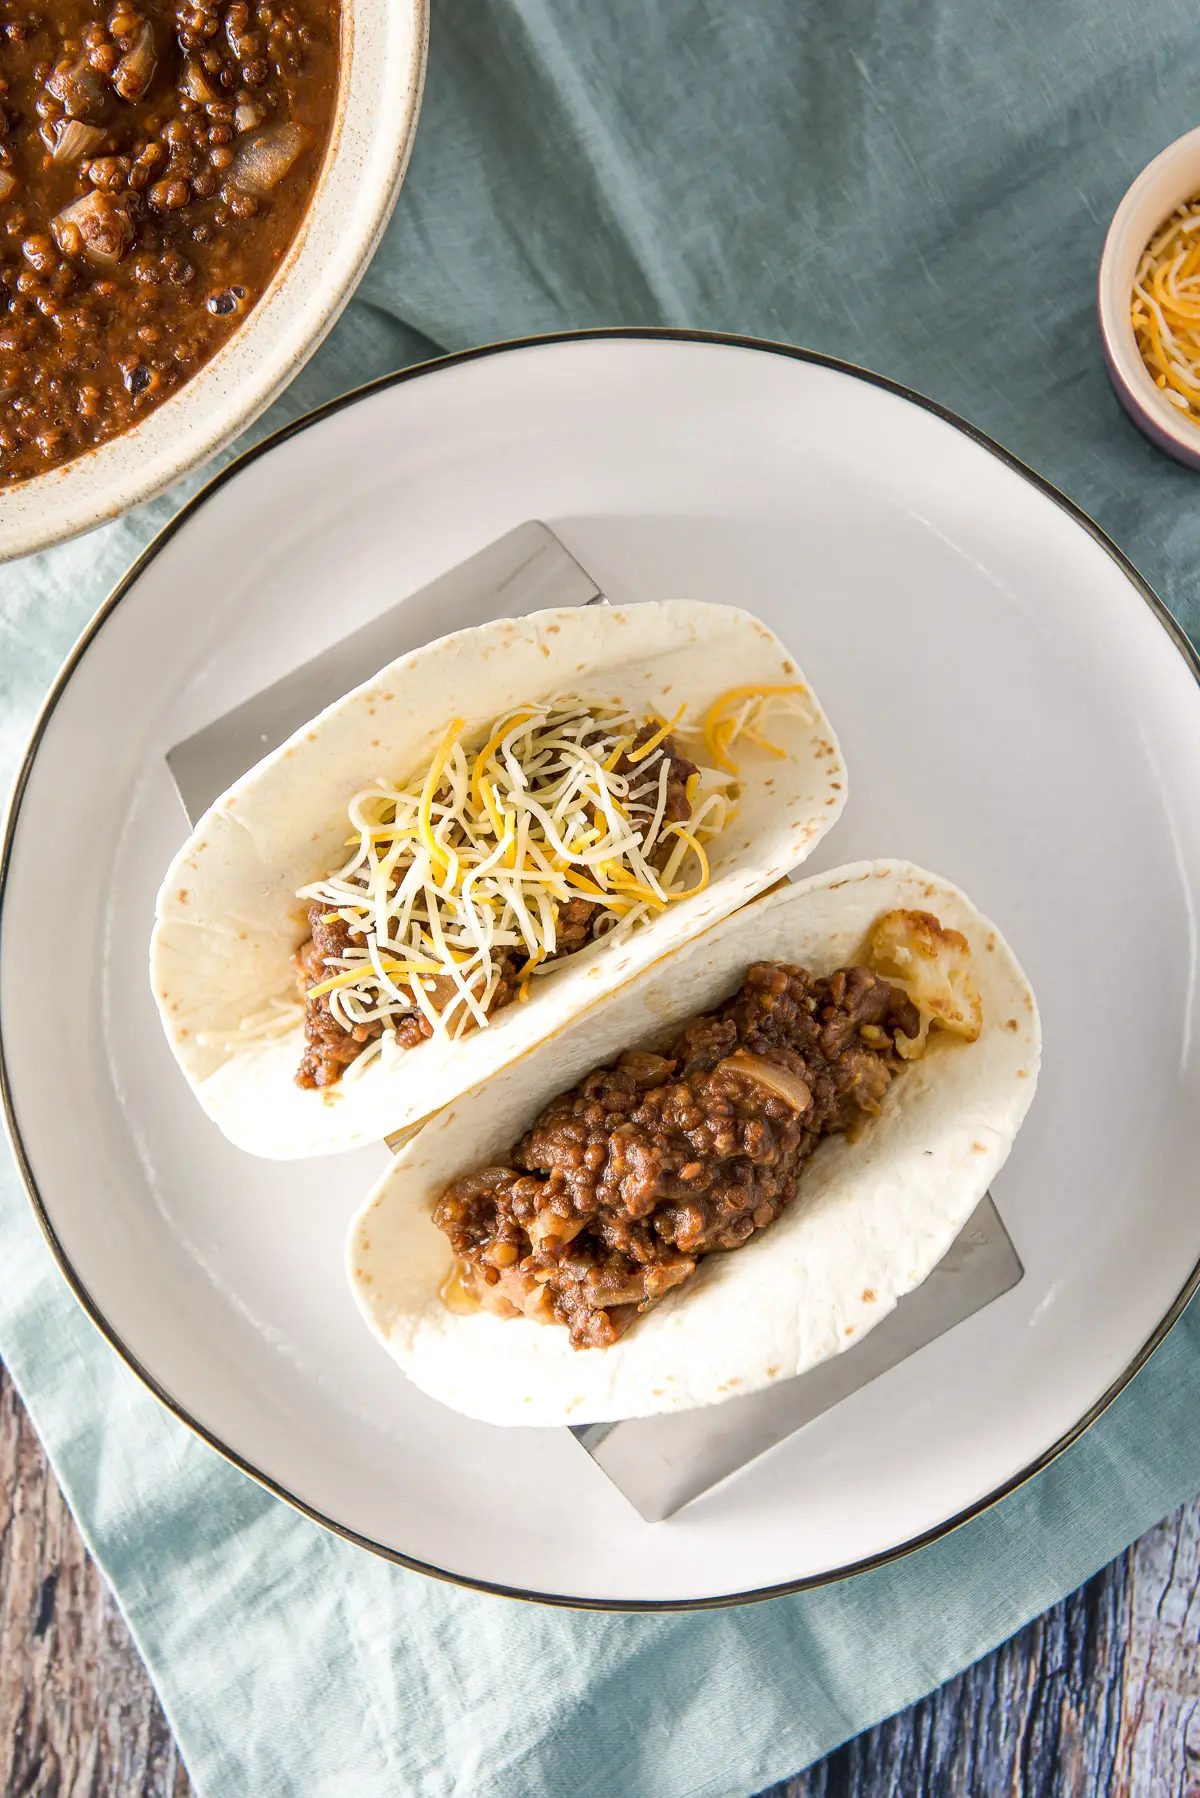 Overhead view of a plate with two tacos on it with lentils off the the side